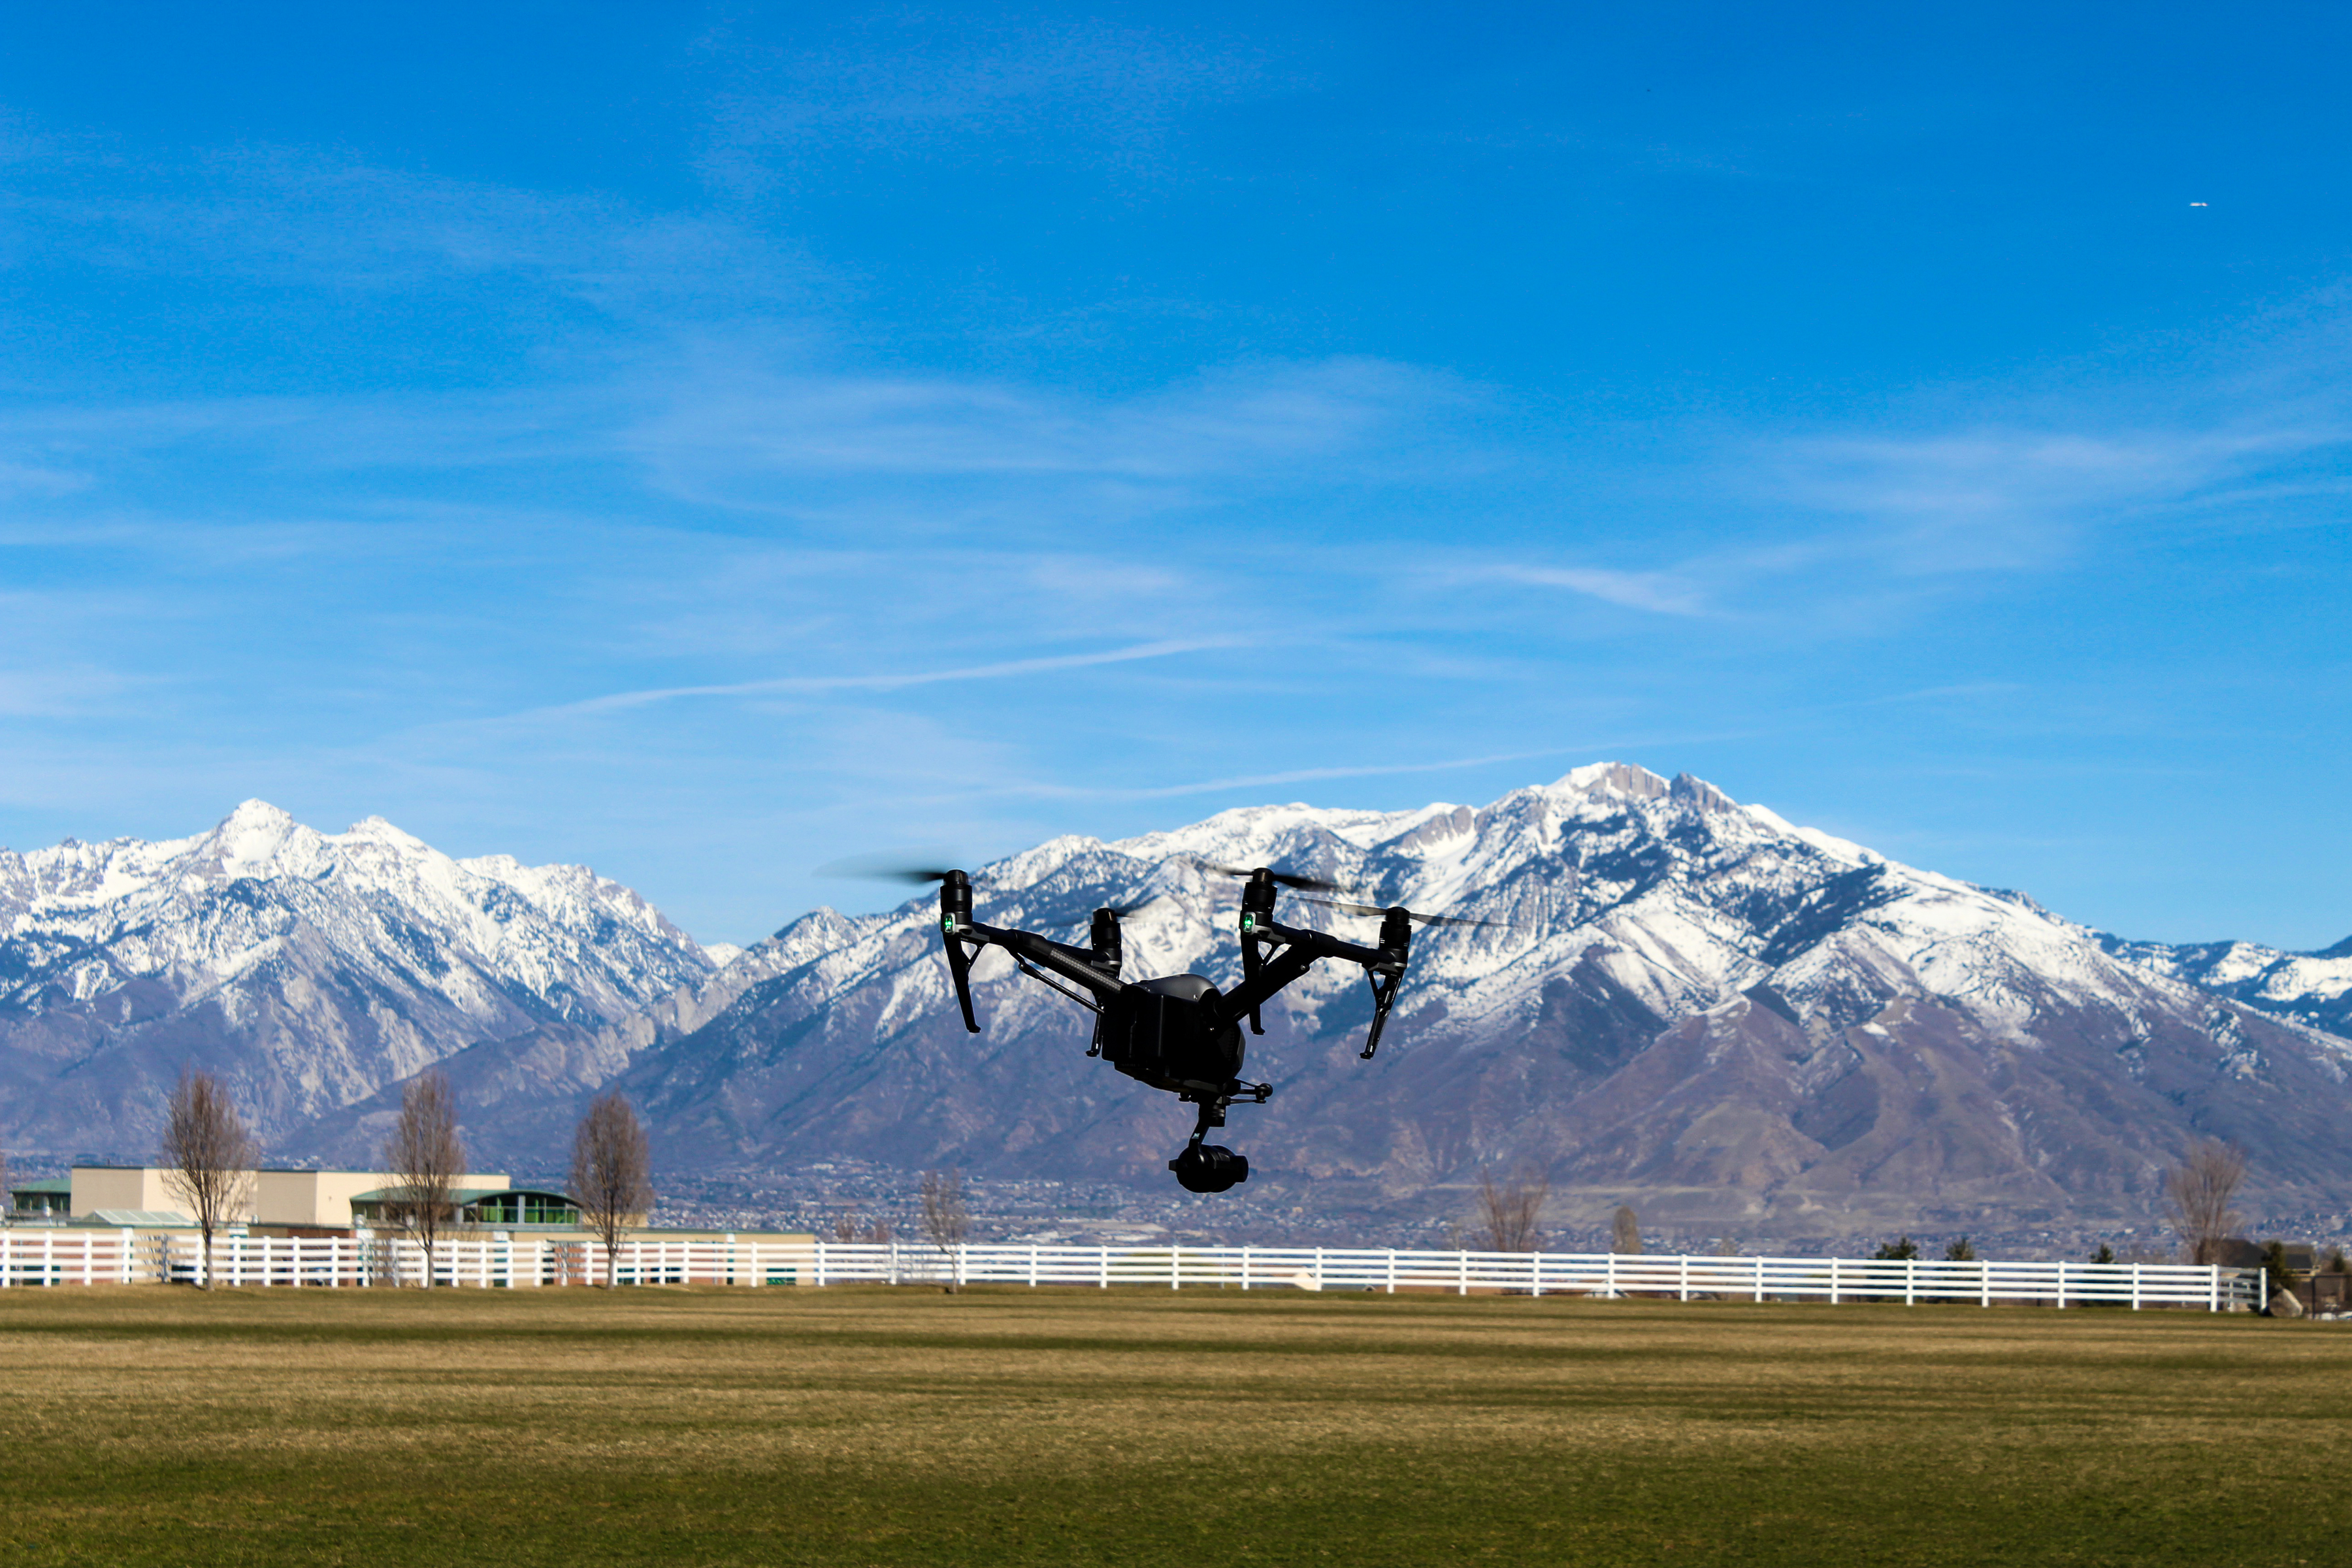 drone with mountain backdrop